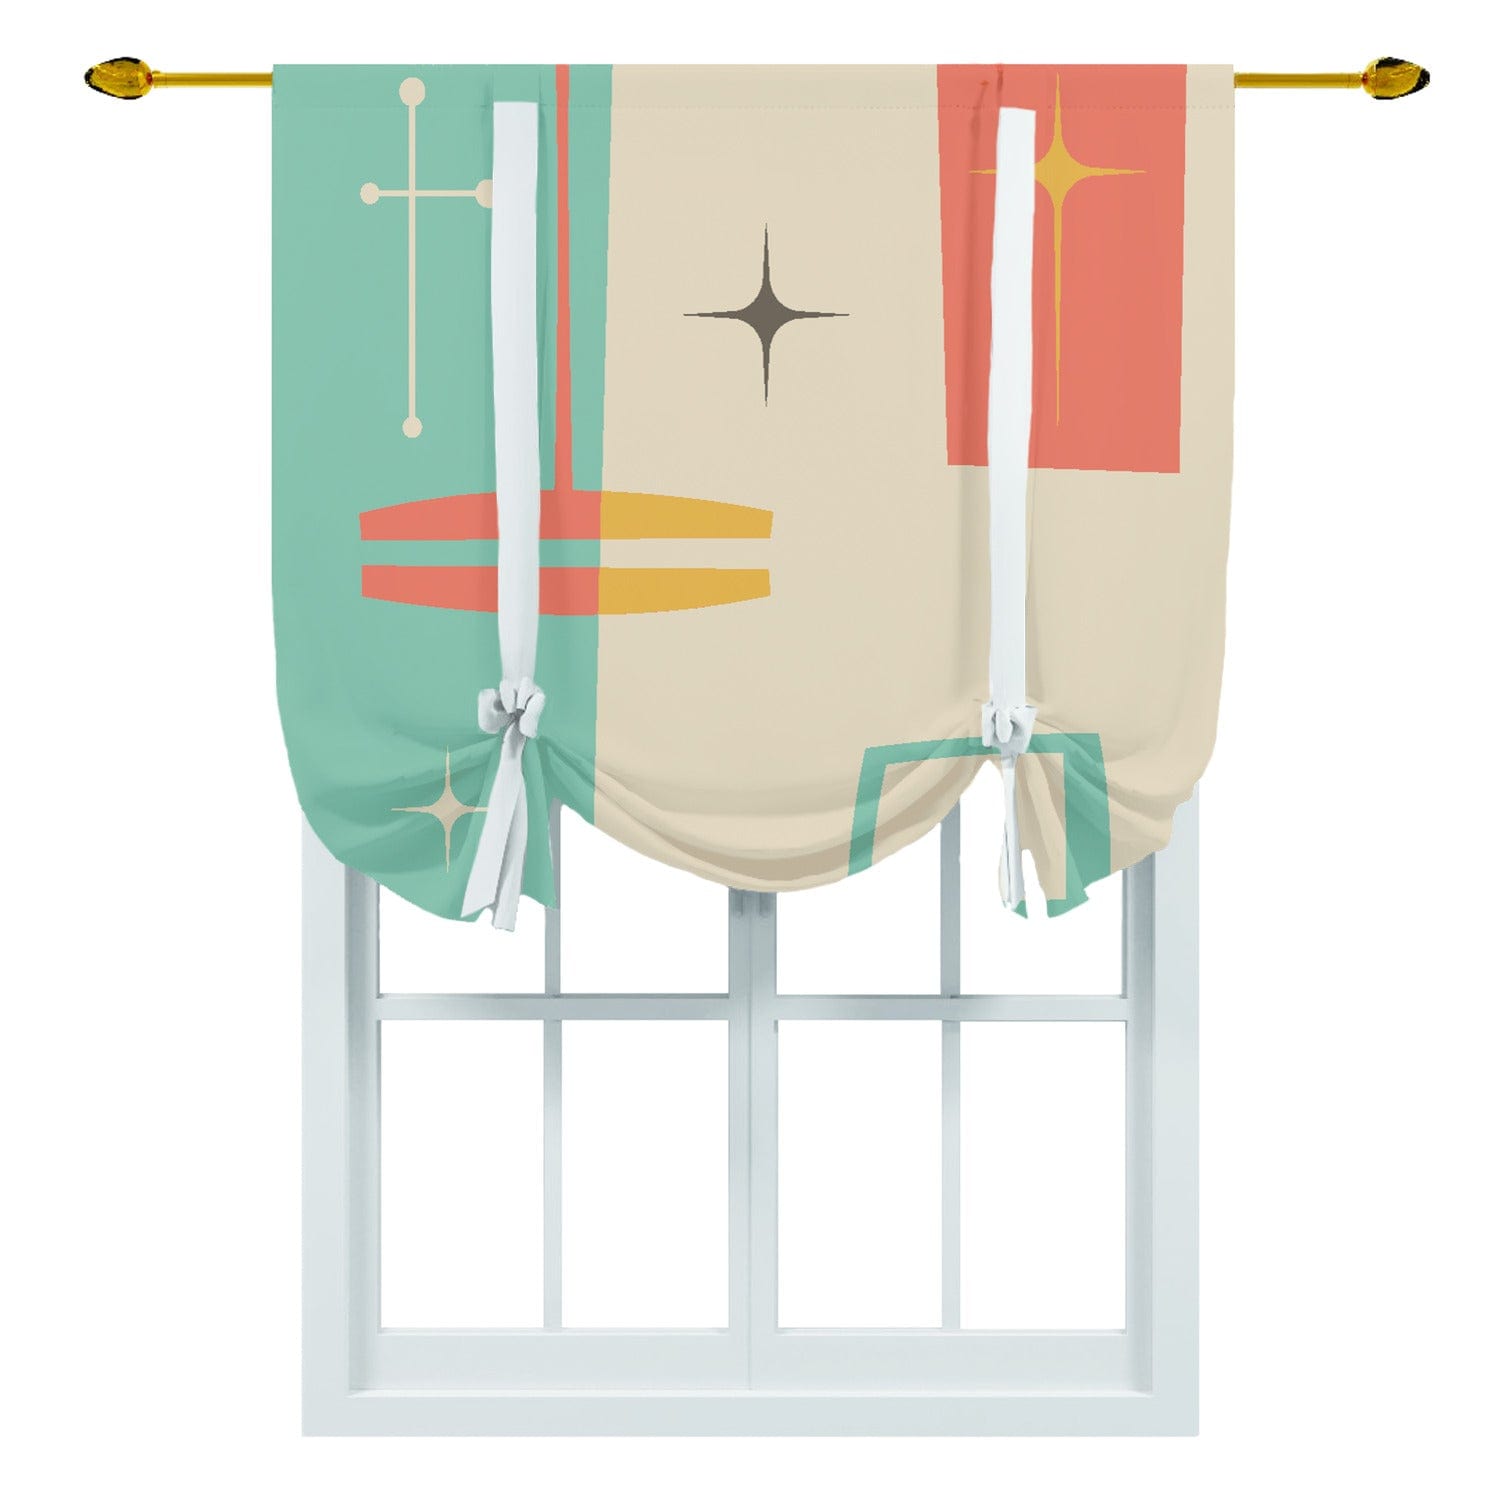 kate-mcenroe-nyc Mid Century Modern Retro Geometric Abstract Tie Up Curtain for Kitchen and Bathroom in Teal, Orange Cream, and Yellow Tie-up Curtains 77147